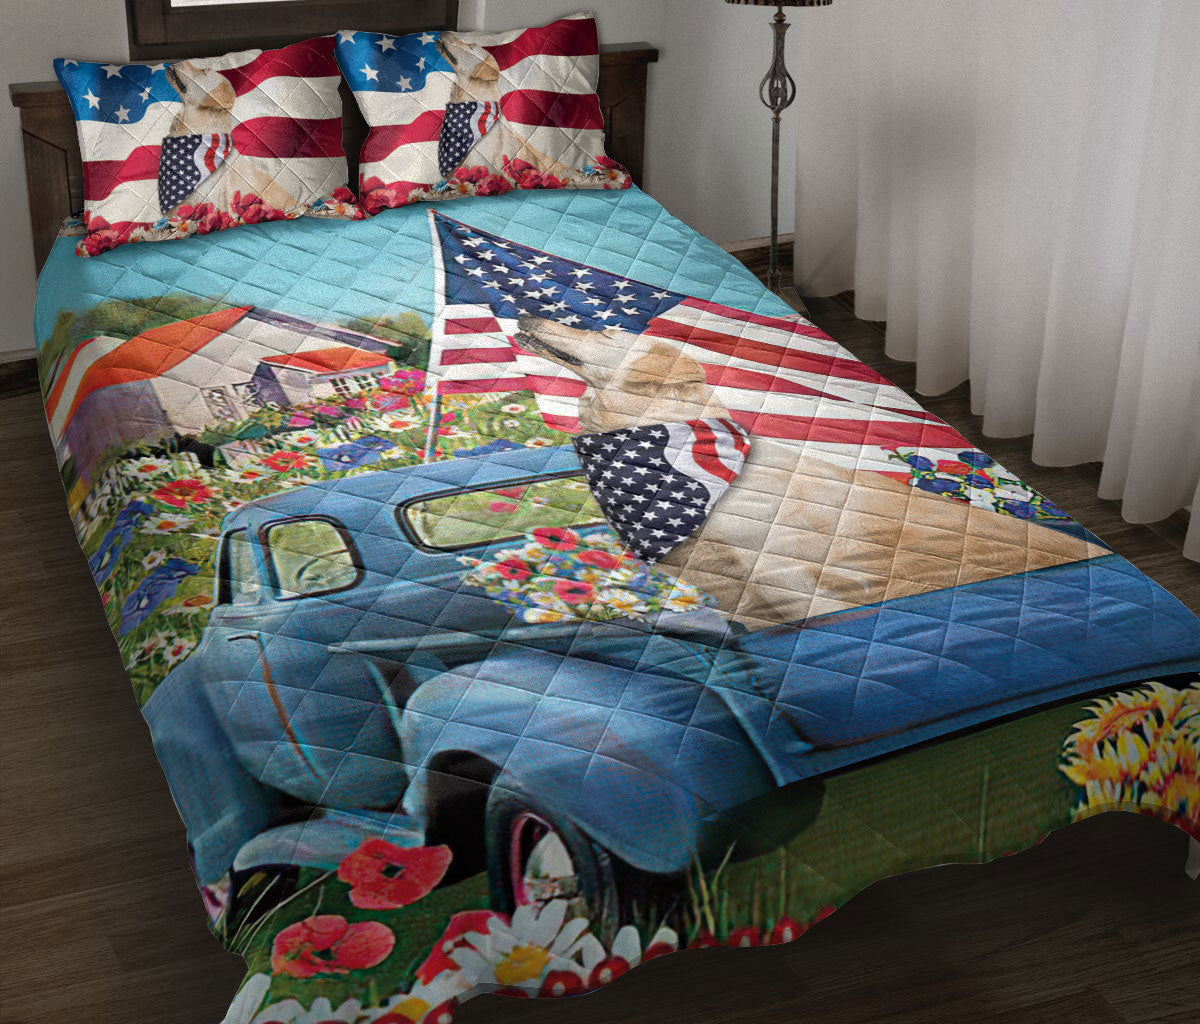 Ohaprints-Quilt-Bed-Set-Pillowcase-Golden-Retriever-Patriotic-Dog-Lover-America-Flag-Flower-Spring-Country-Road-Blanket-Bedspread-Bedding-2621-Throw (55'' x 60'')